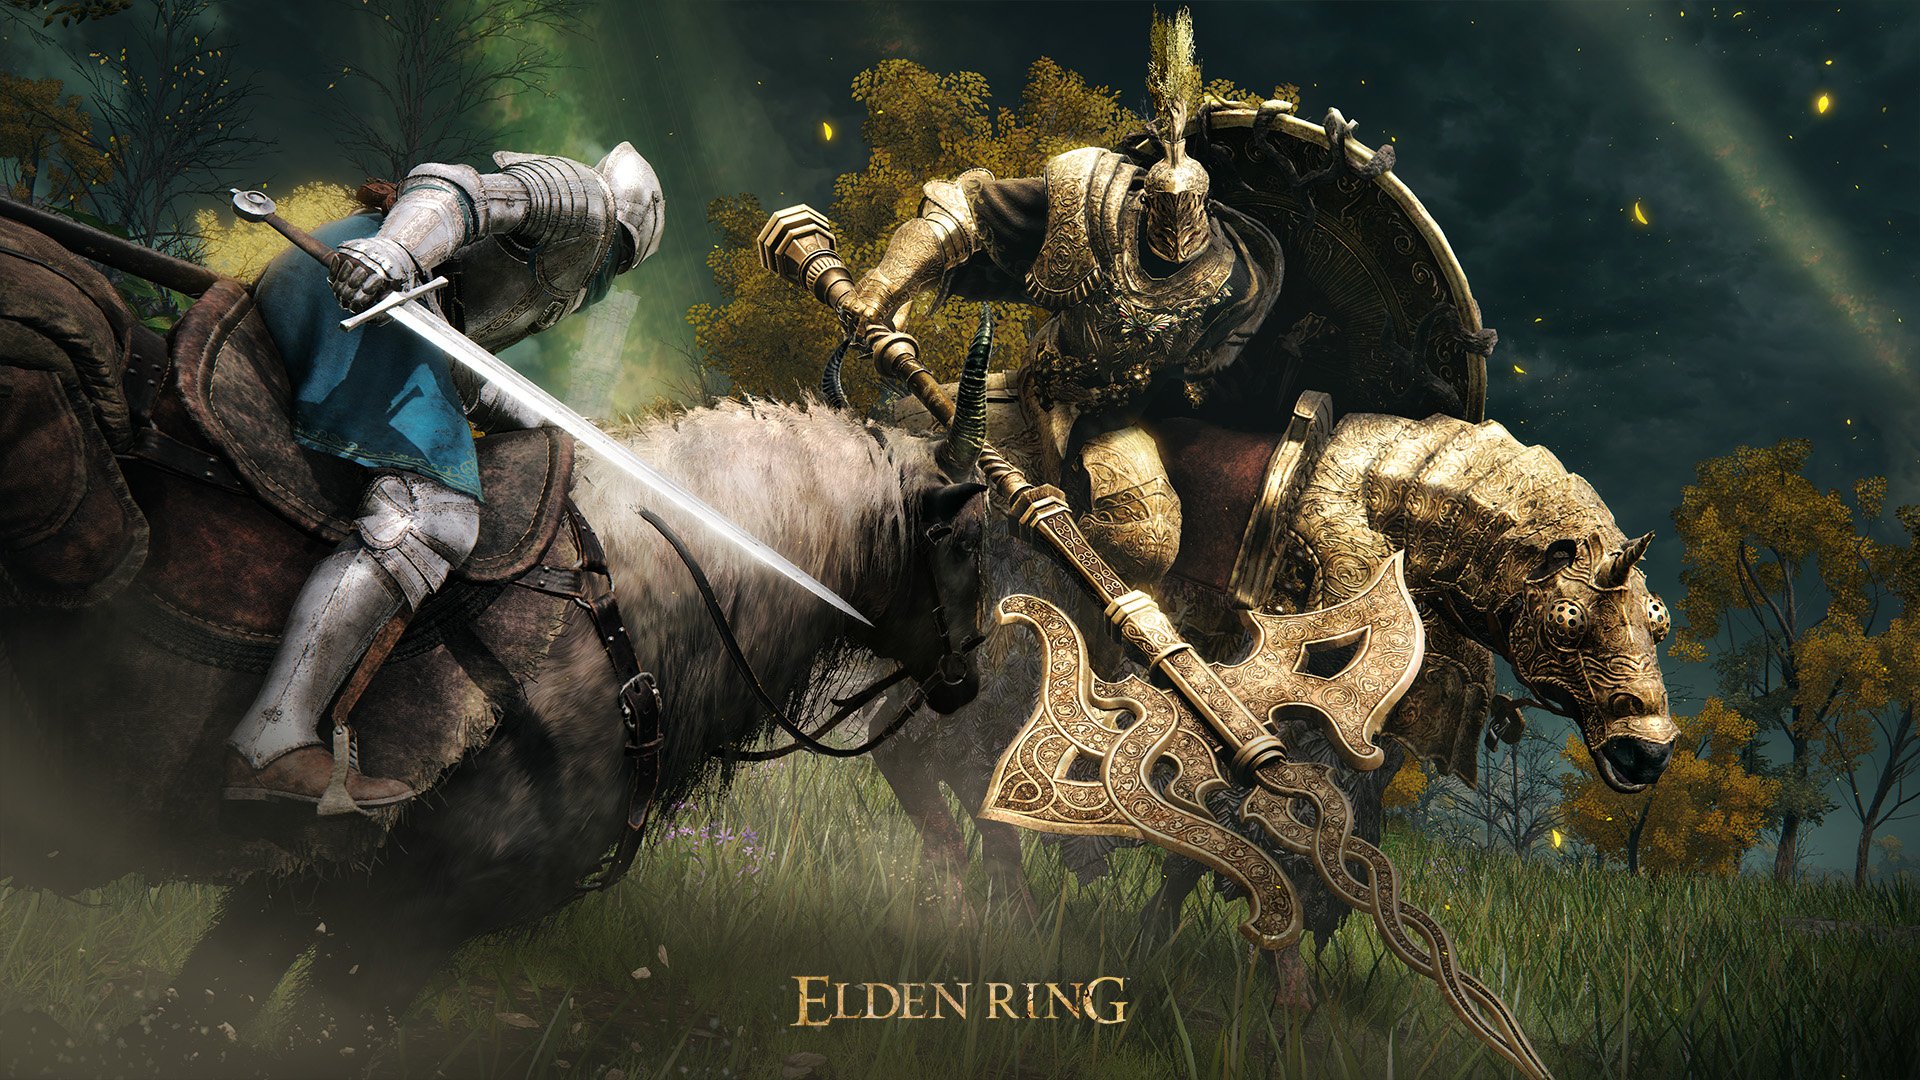 HD tarnished (elden ring) wallpapers